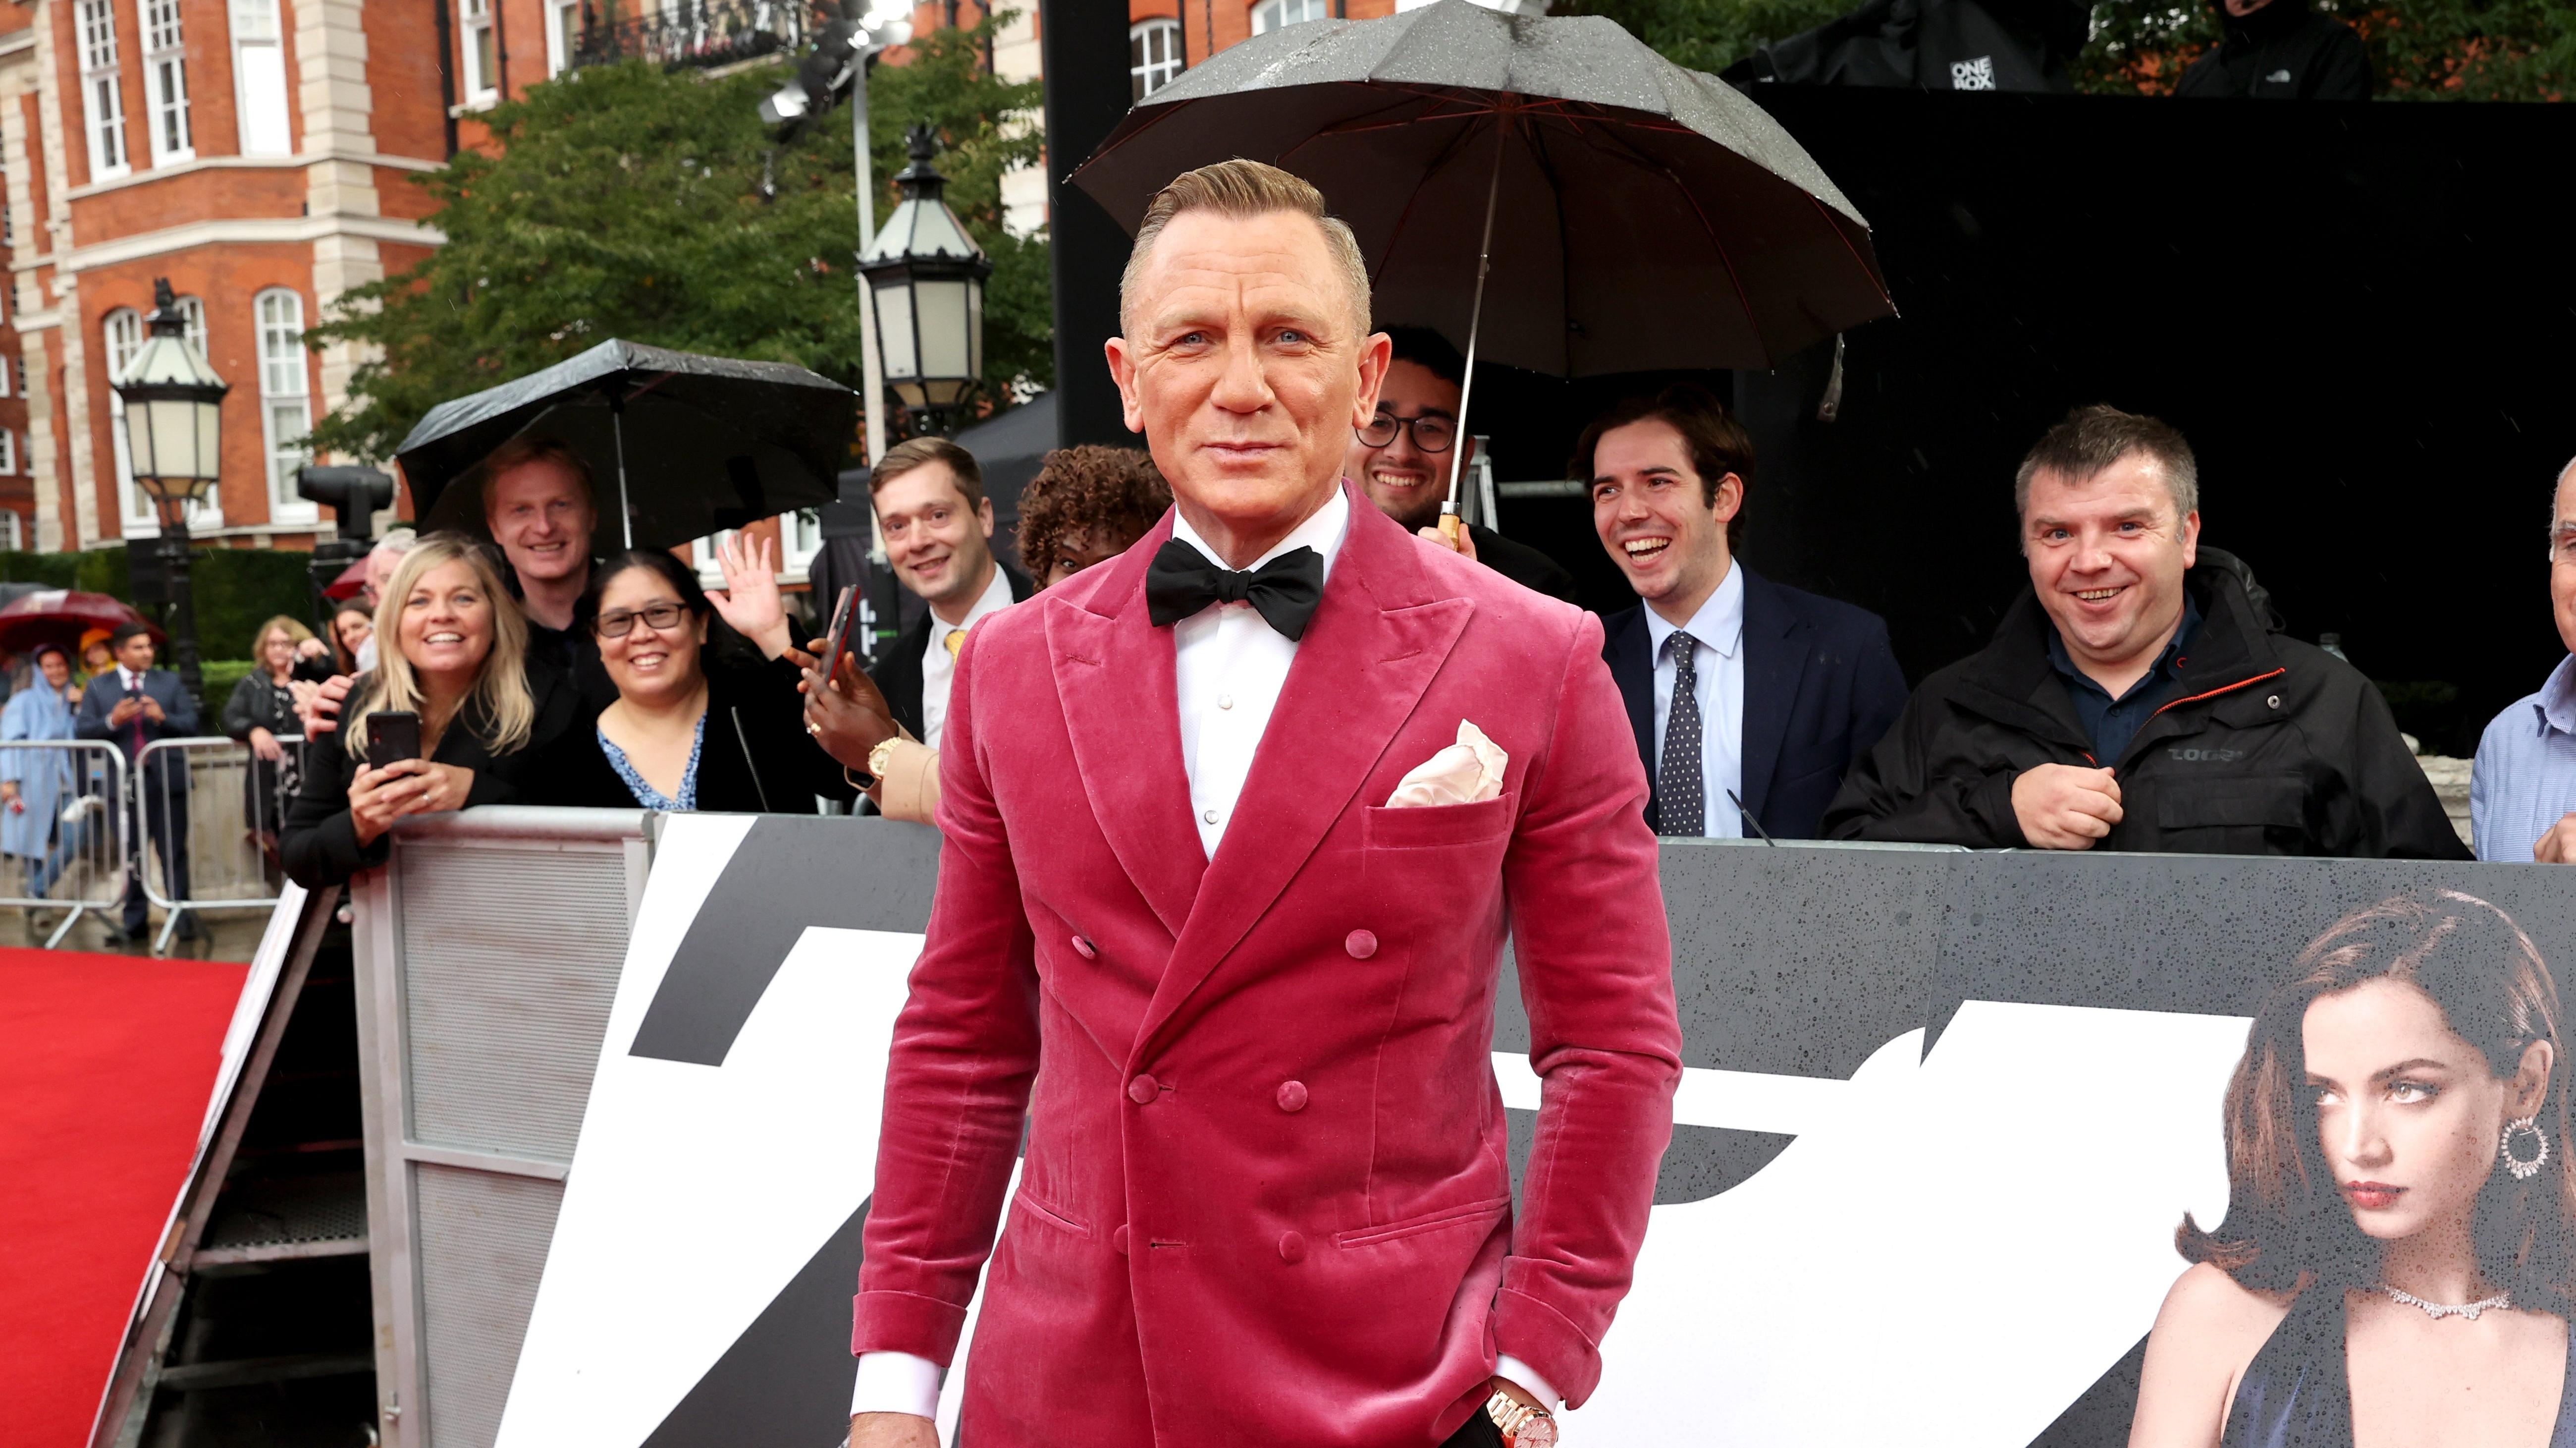 Daniel Craig just found out about the “Ladies and gentlemen, the weekend” meme